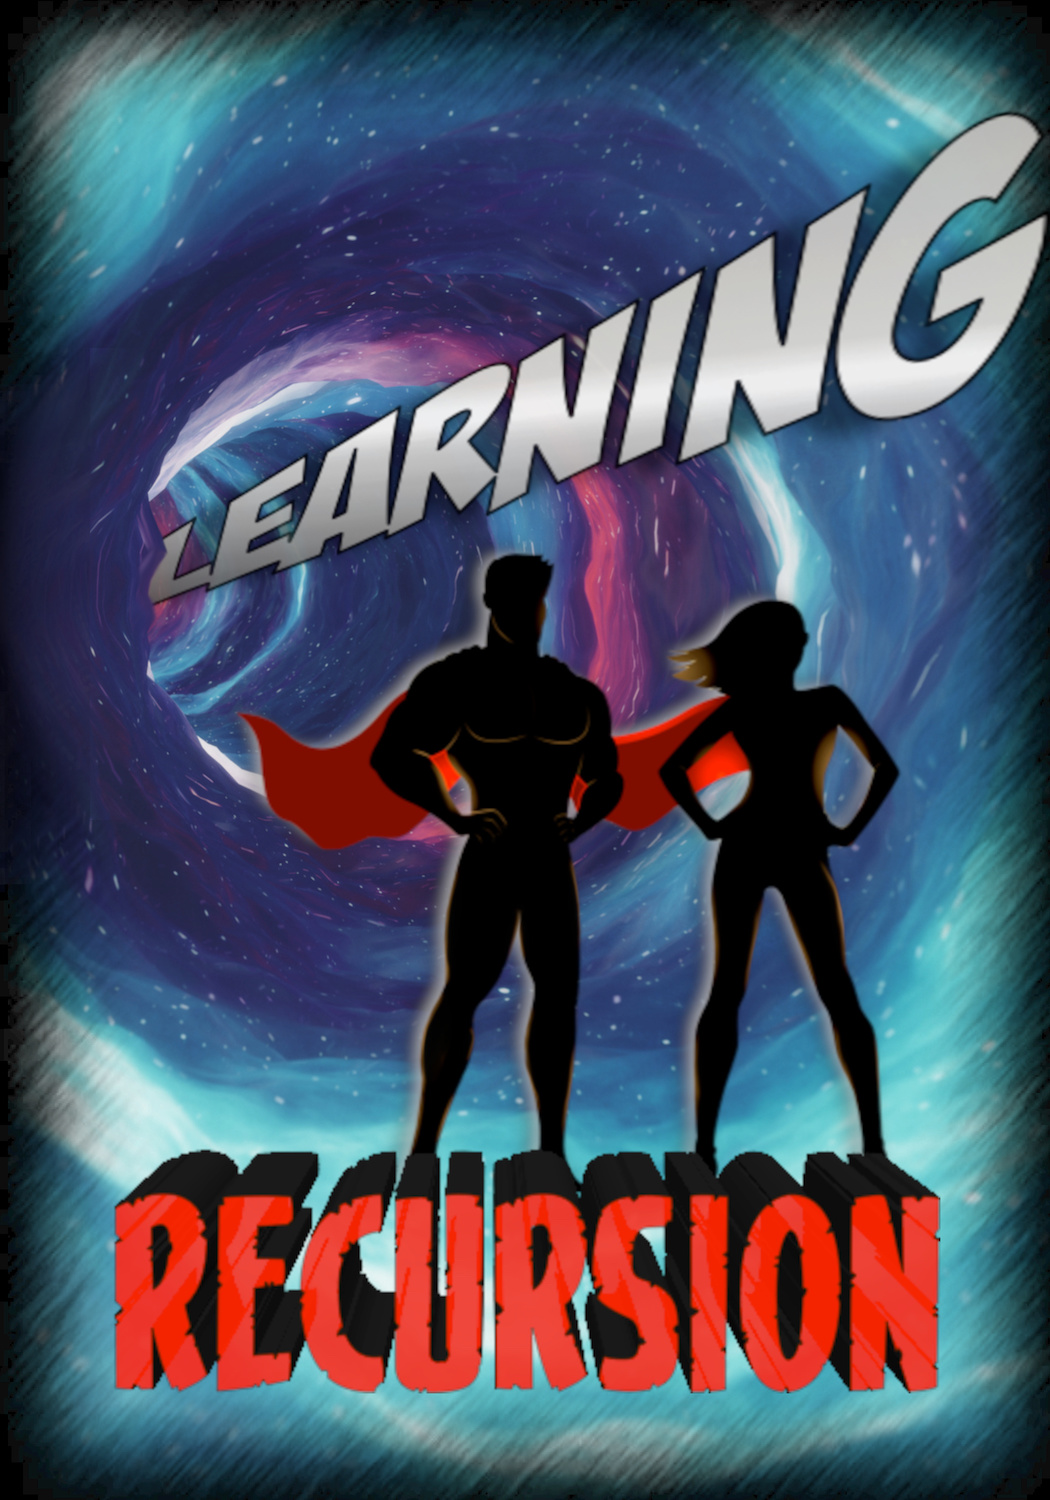 Learning Recursion: A free booklet by Alvin Alexander